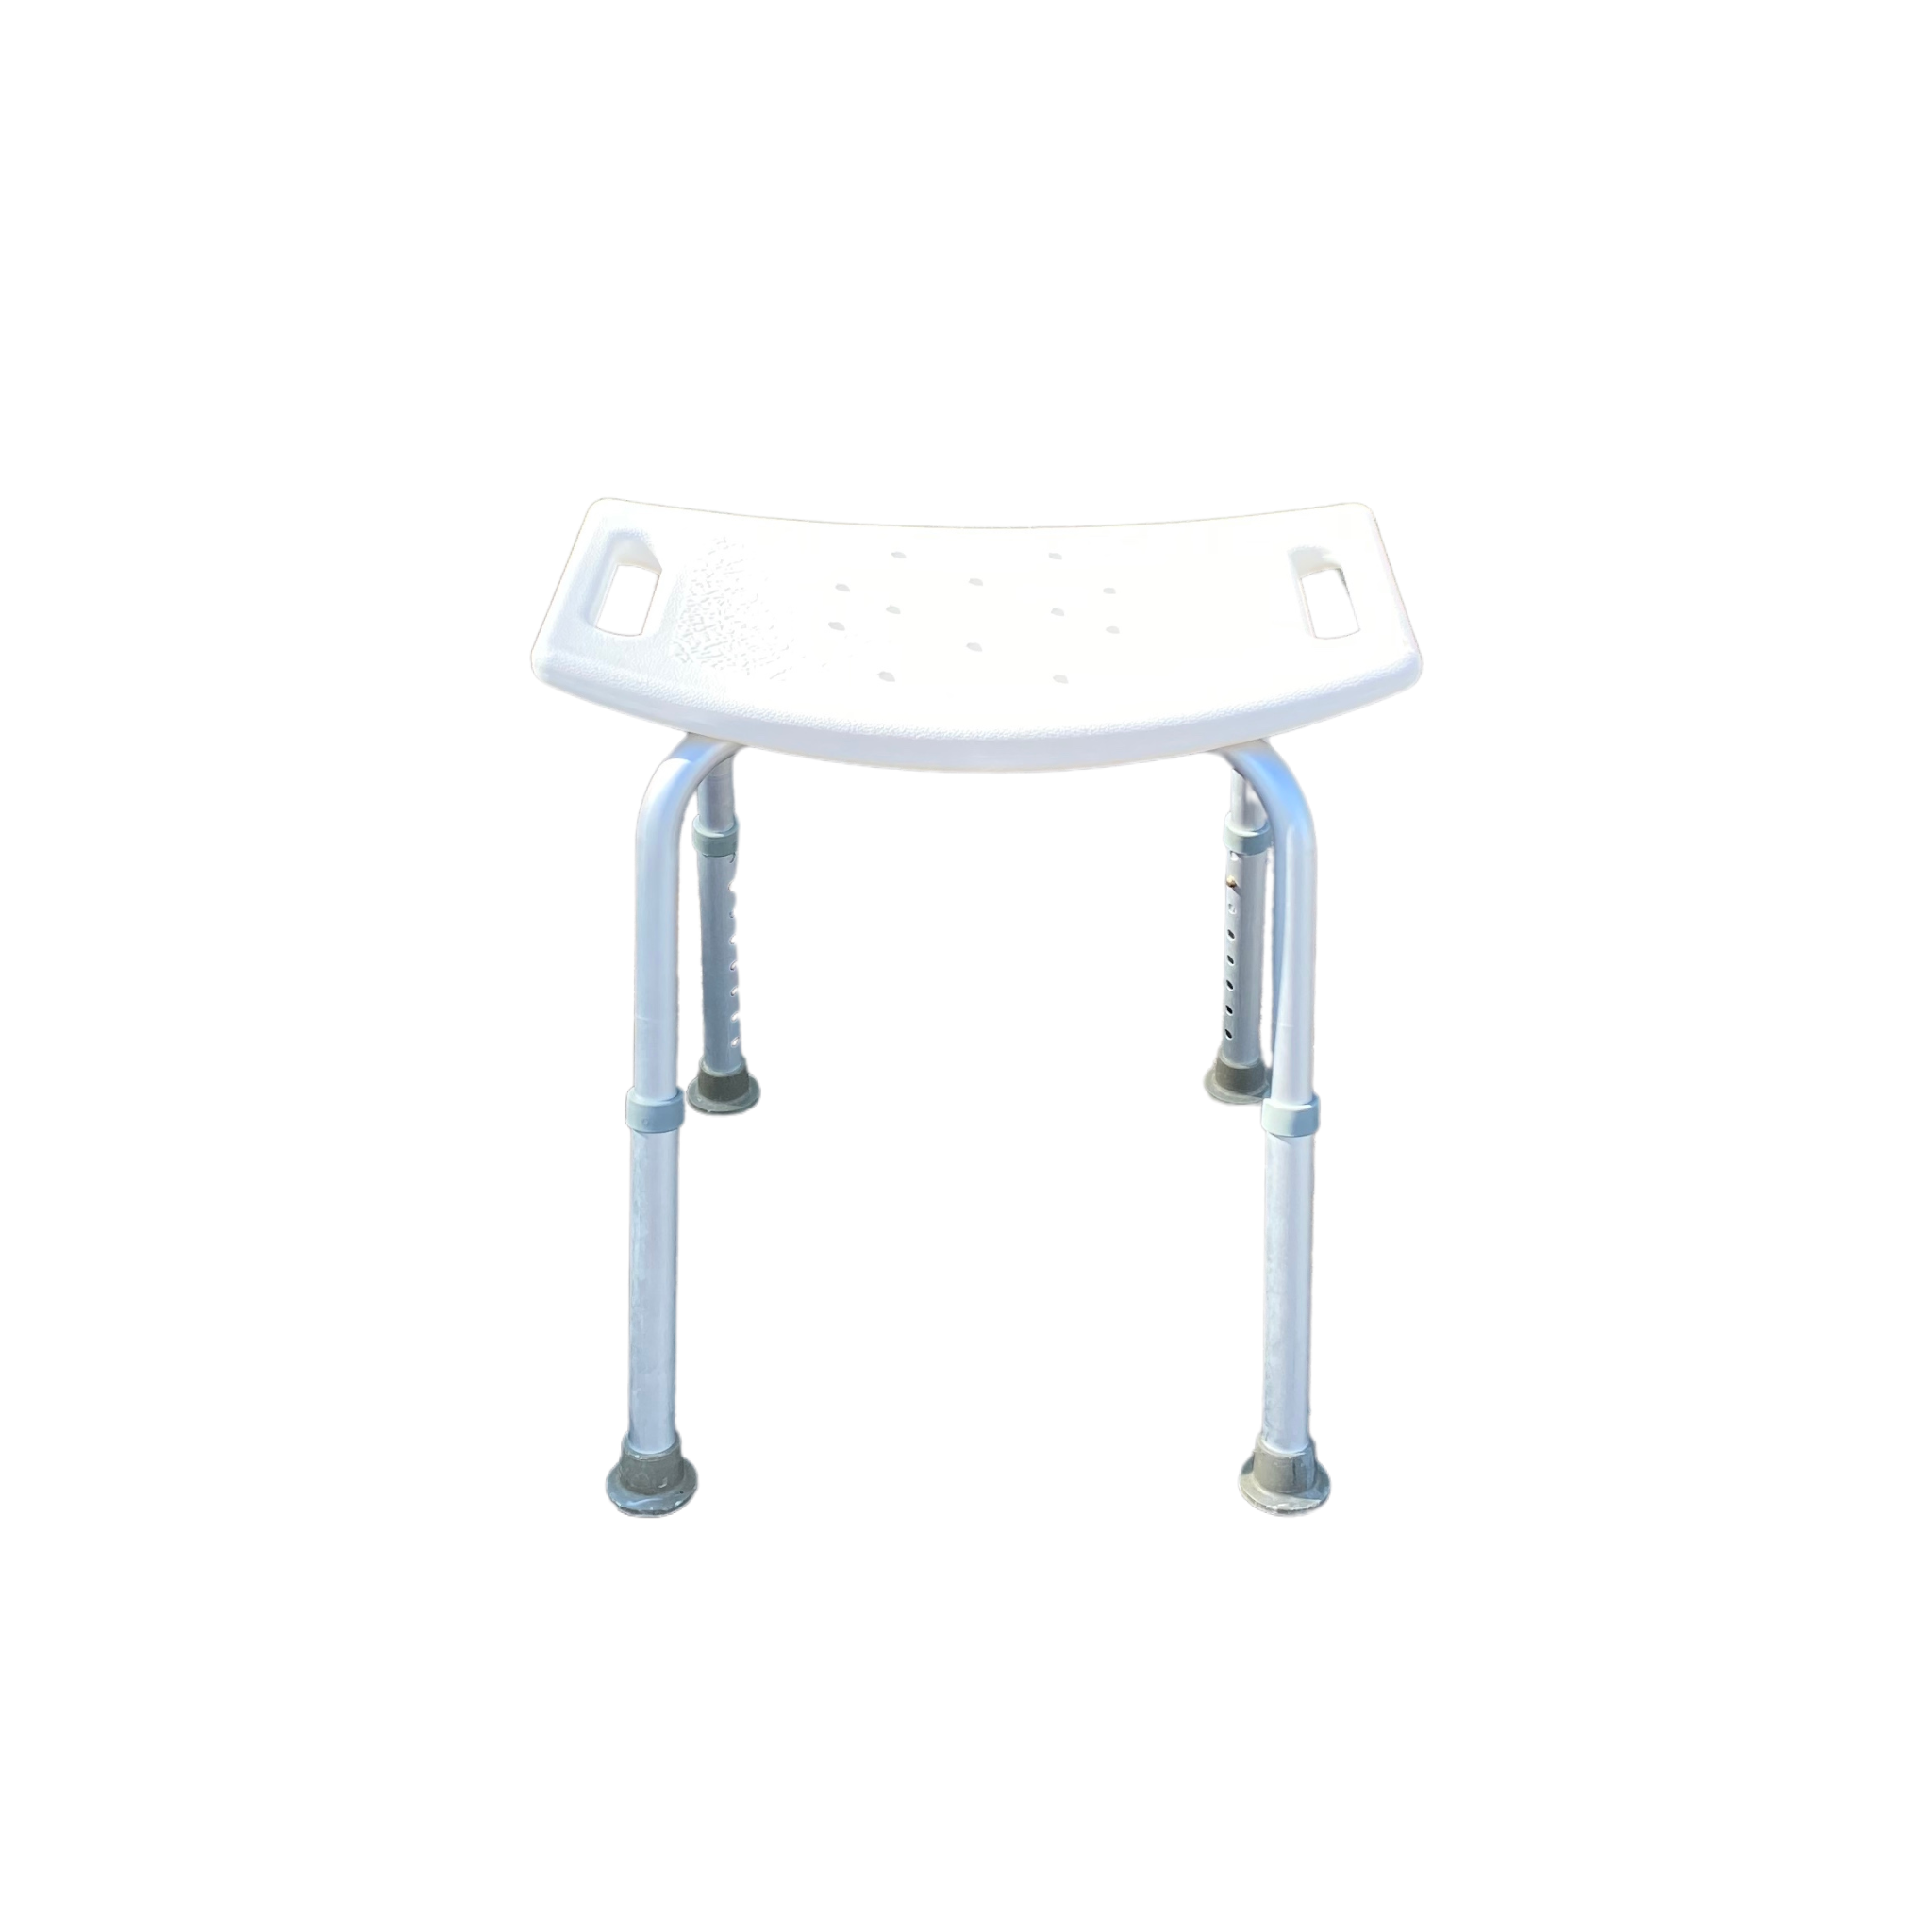 Rental - Breezy Shower Stool from Aged Care and Medical - Shower Stoll for Hire for aged cAre